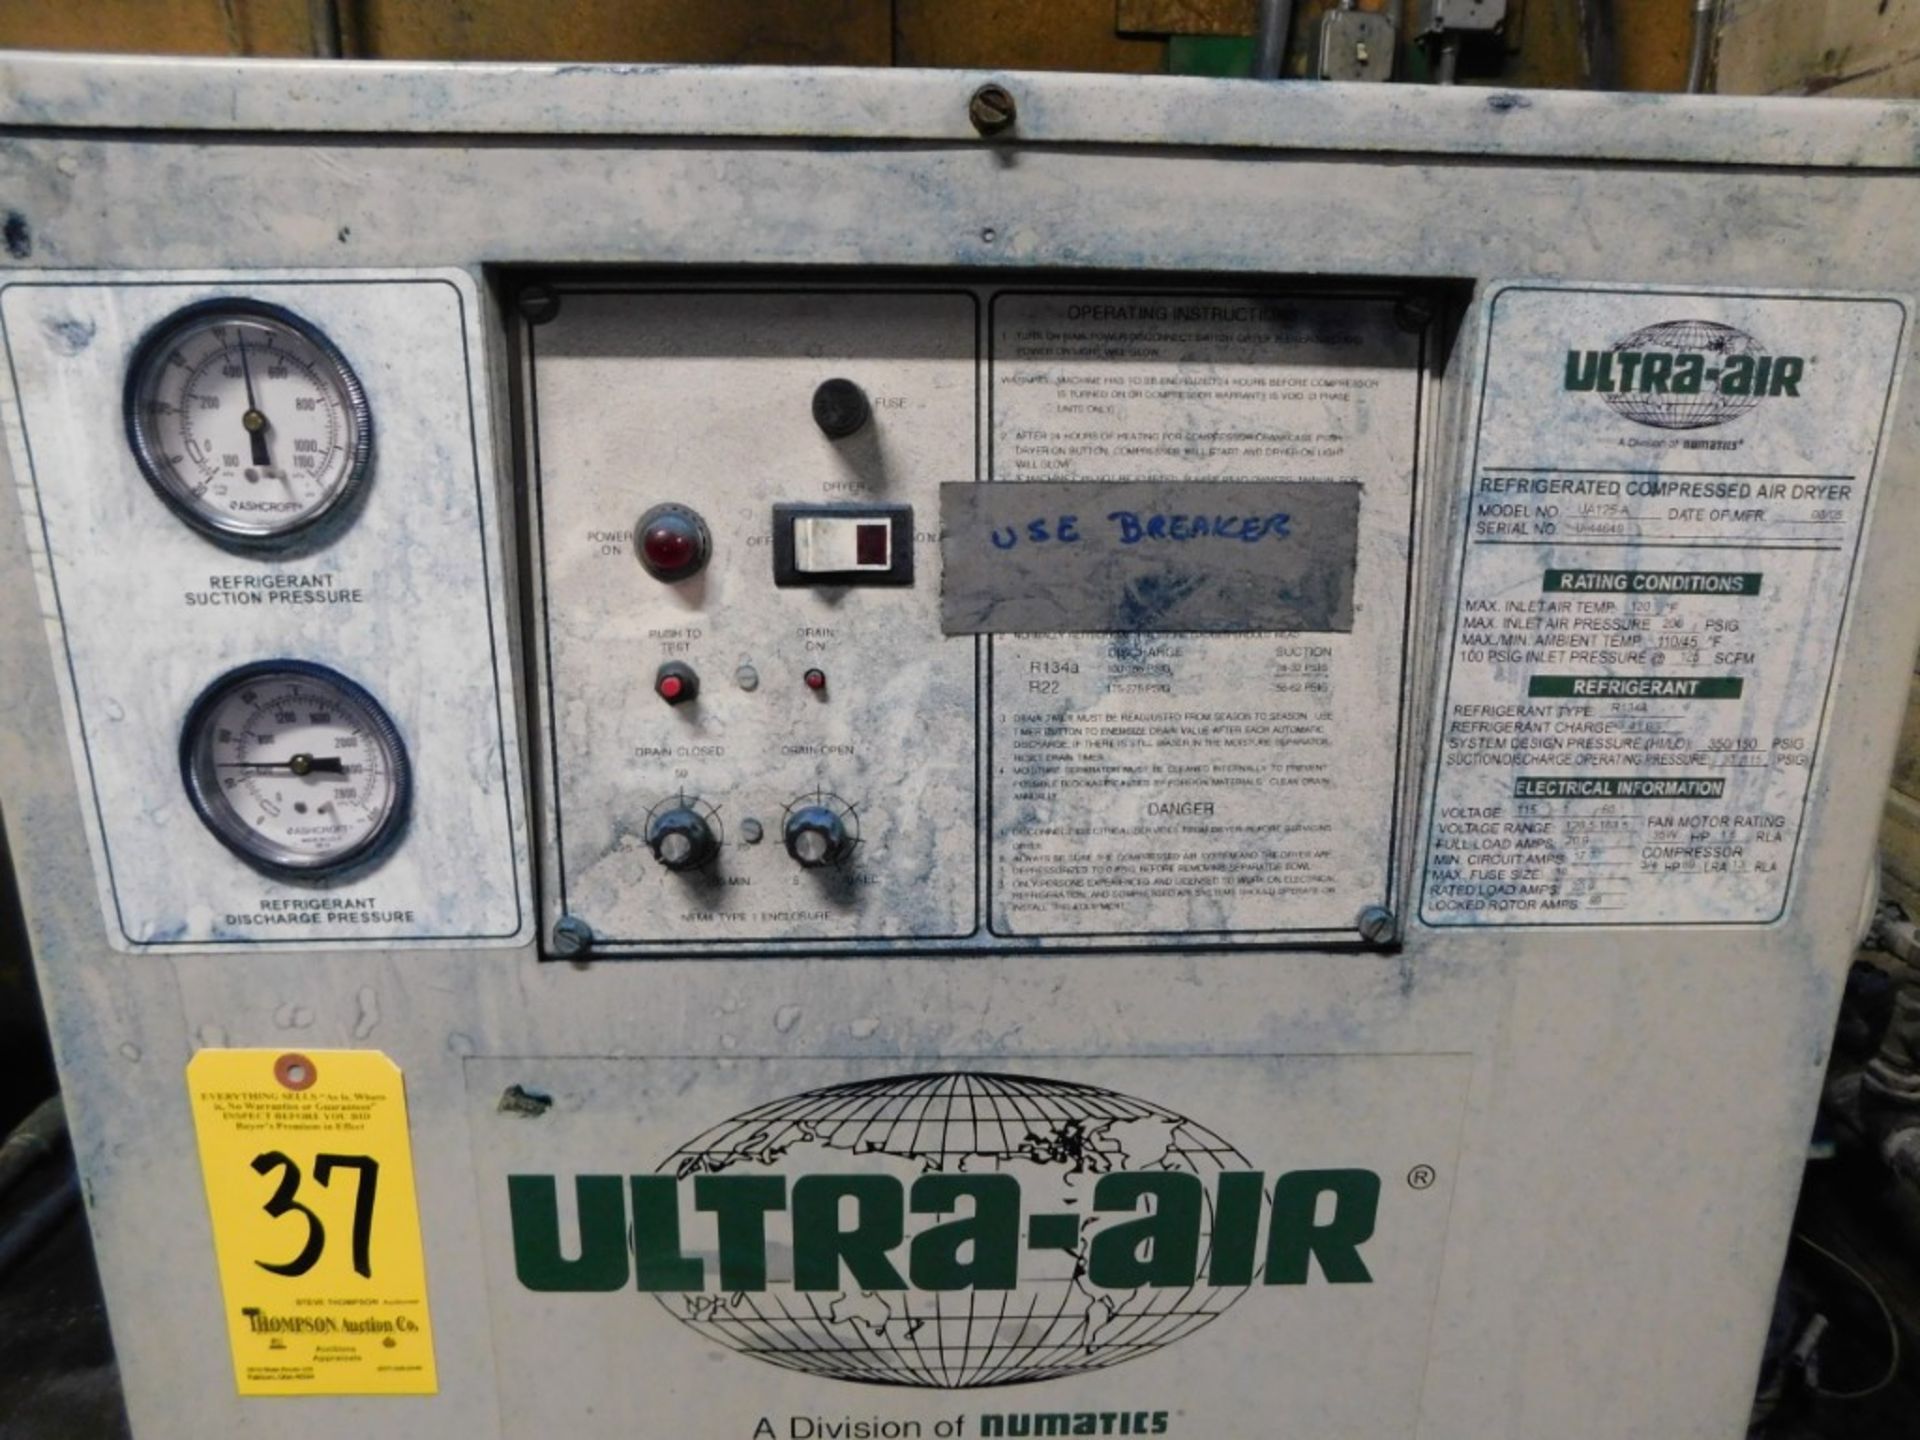 Ultra Air Model UA201-125-A Refrigerated Air Dryer, s/n U-44649, Loading Fee Including Unwire $50.00 - Image 2 of 3